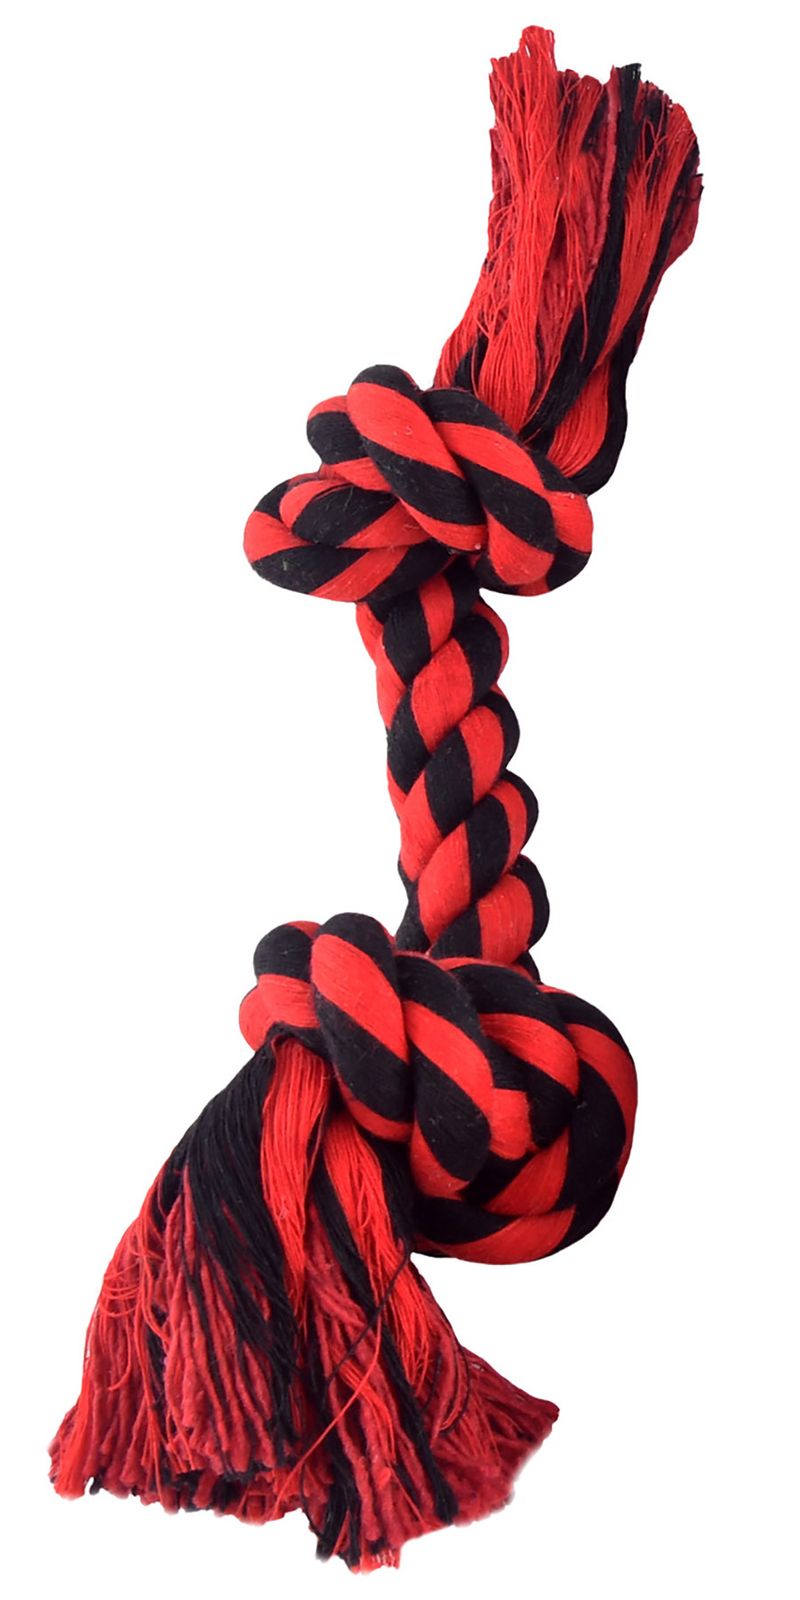 Nuts-for-Knots-2-Knot-Rope-9-